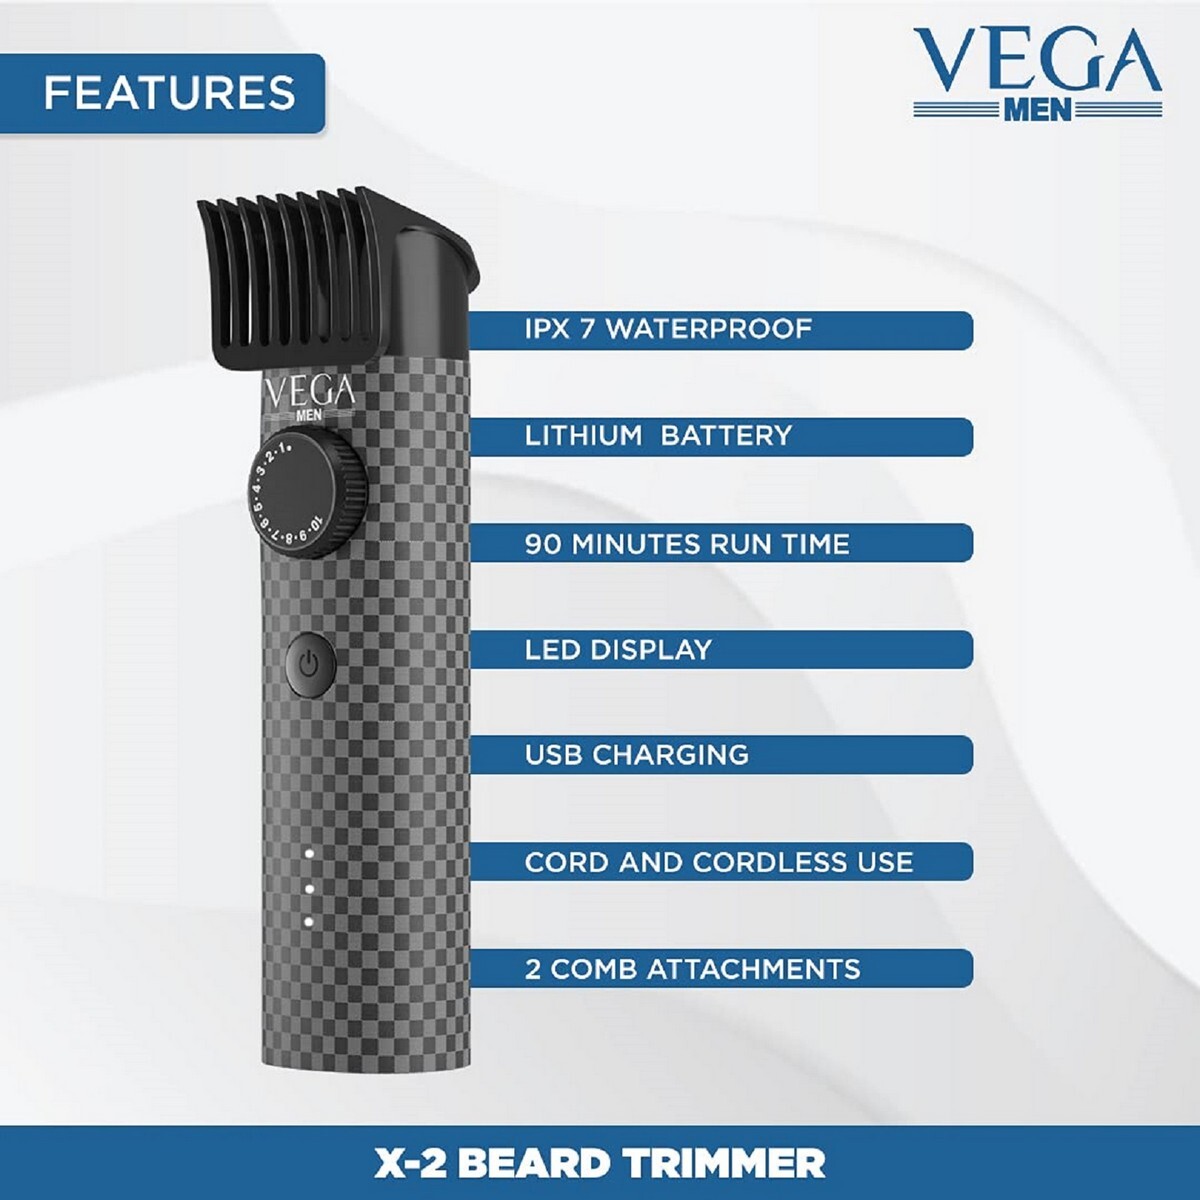 Vega Men X2 Beard Trimmer For Men With Quick Charge, 90 Mins Run-time, Waterproof, For Cord & Cordless Use And 40 Length Settings, VHTH-17